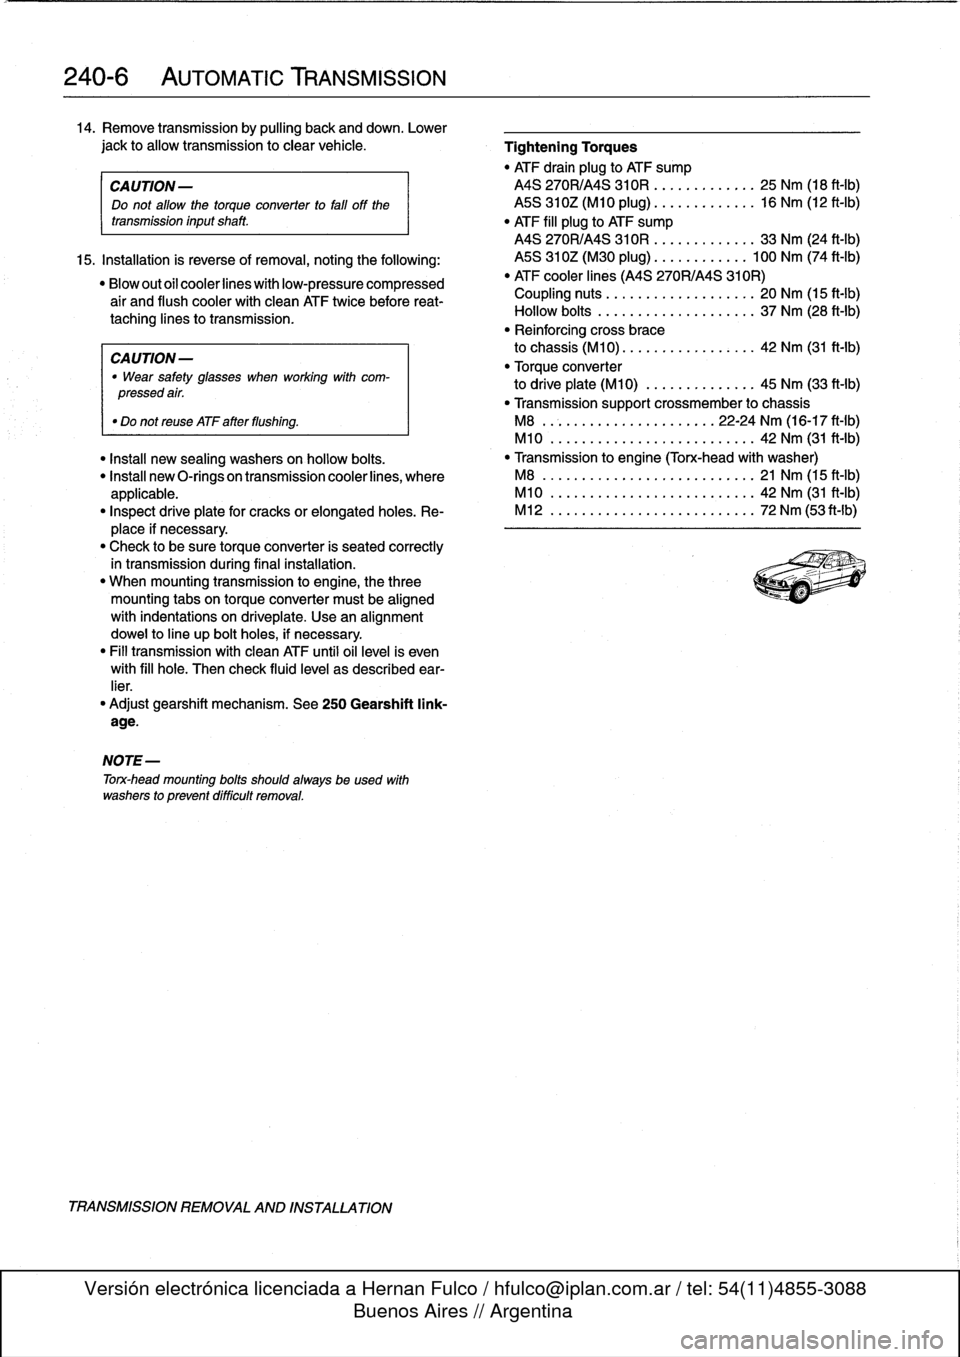 BMW 318i 1998 E36 User Guide 
240-
6

	

AUTOMATIC
TRANSMISSION

14
.
Remove
transmission
by
pulling
back
and
down
.
Lower

jack
to
allow
transmission
to
clear
vehicle
.

	

Tightening
Torques

"
ATF
drain
plug
to
ATF
sump

CA
UT